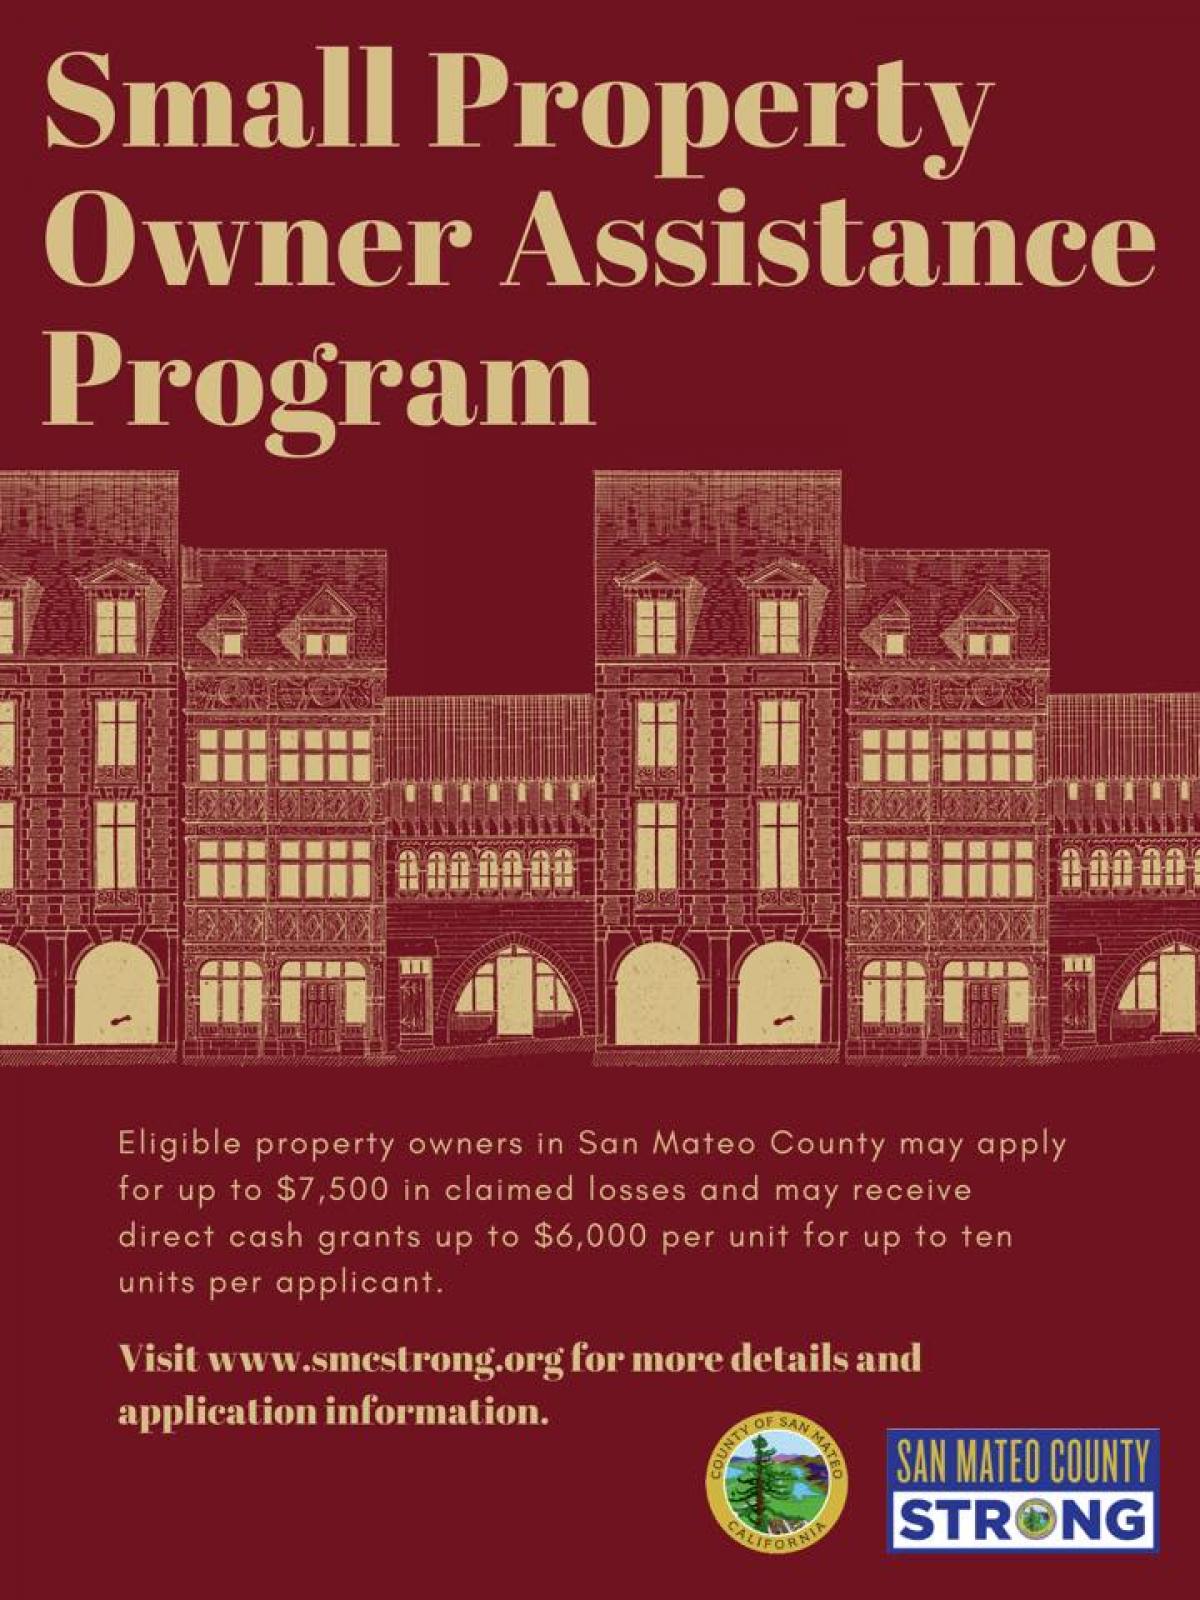 Small Property Owner Assistance Program-English